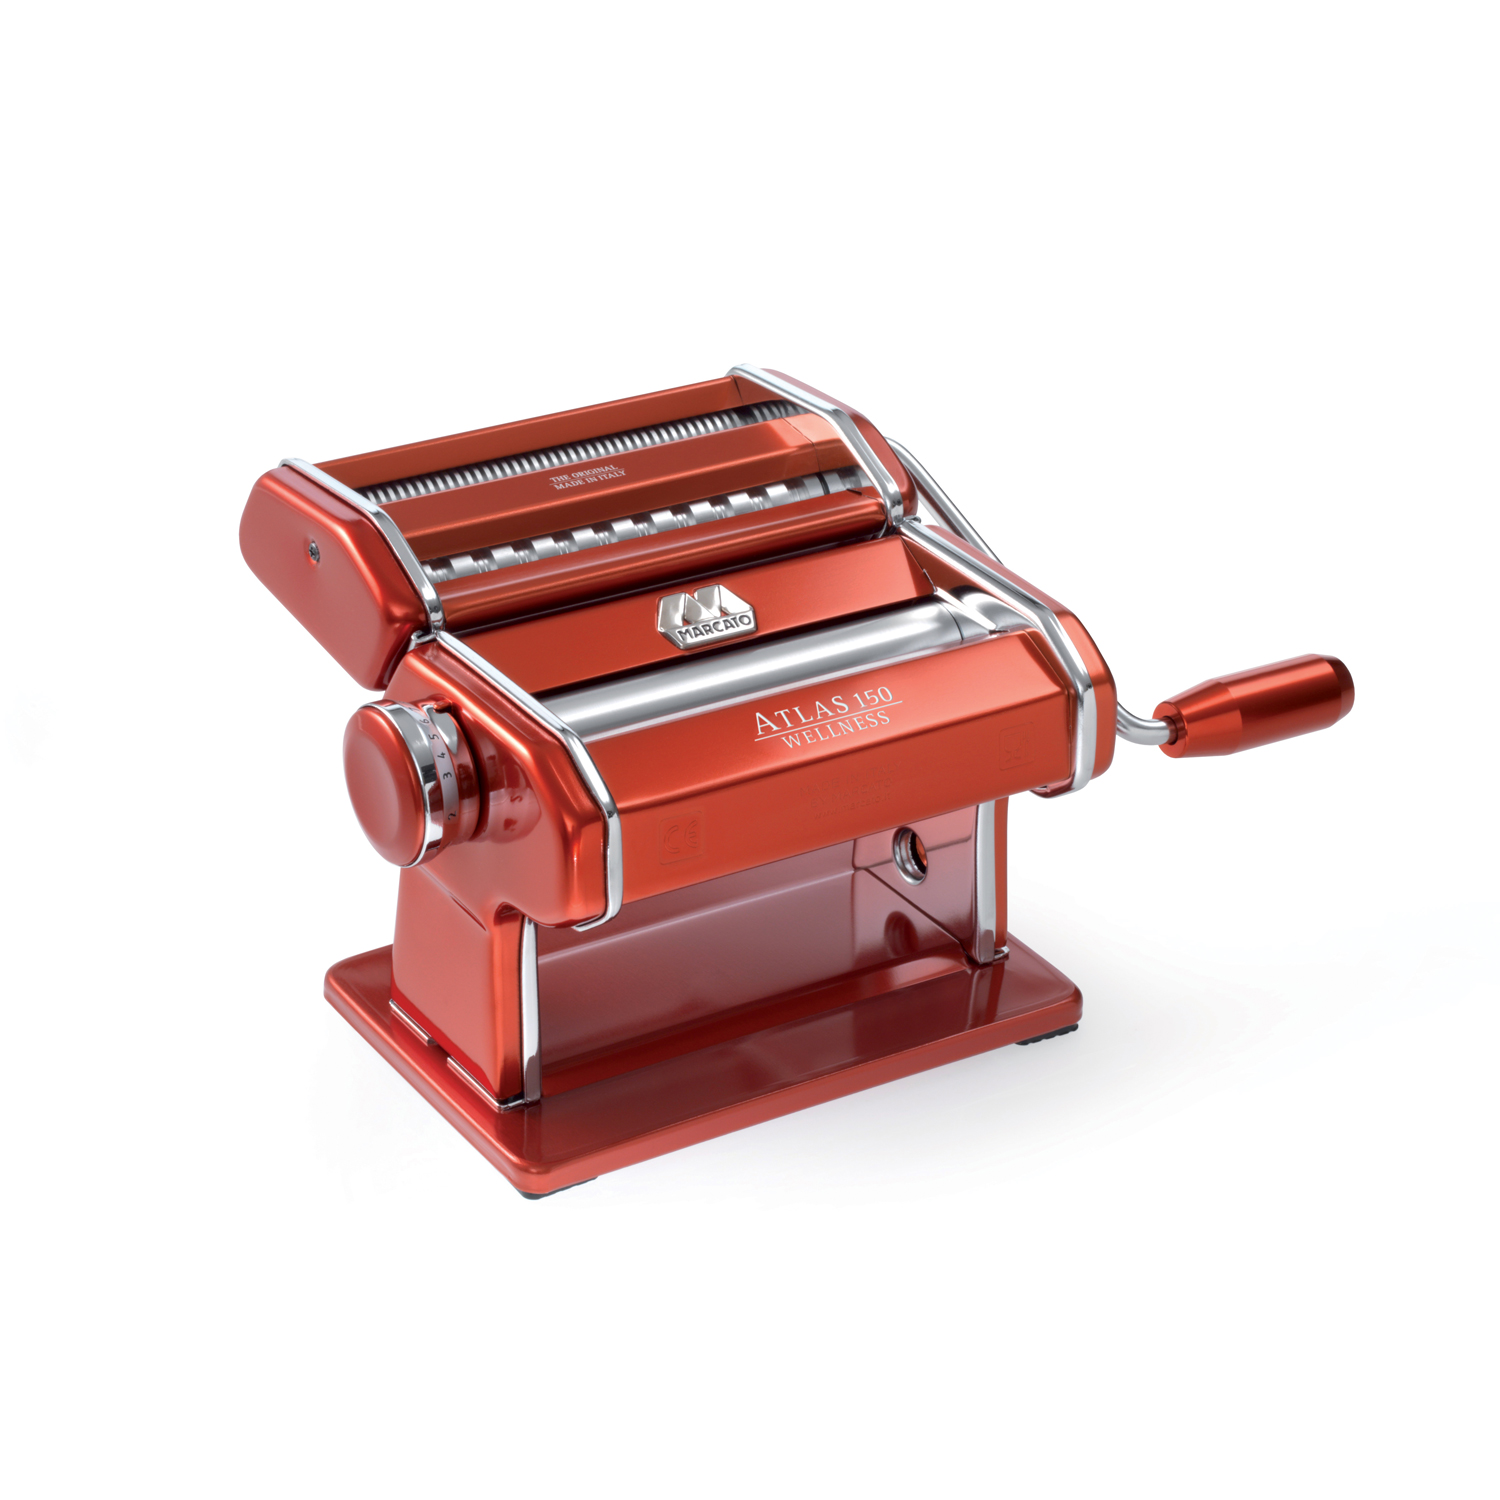 Marcato Atlas 150 Machine with Pasta Cutter, Hand Crank, and Instructions, Made in Italy, Red - image 1 of 3